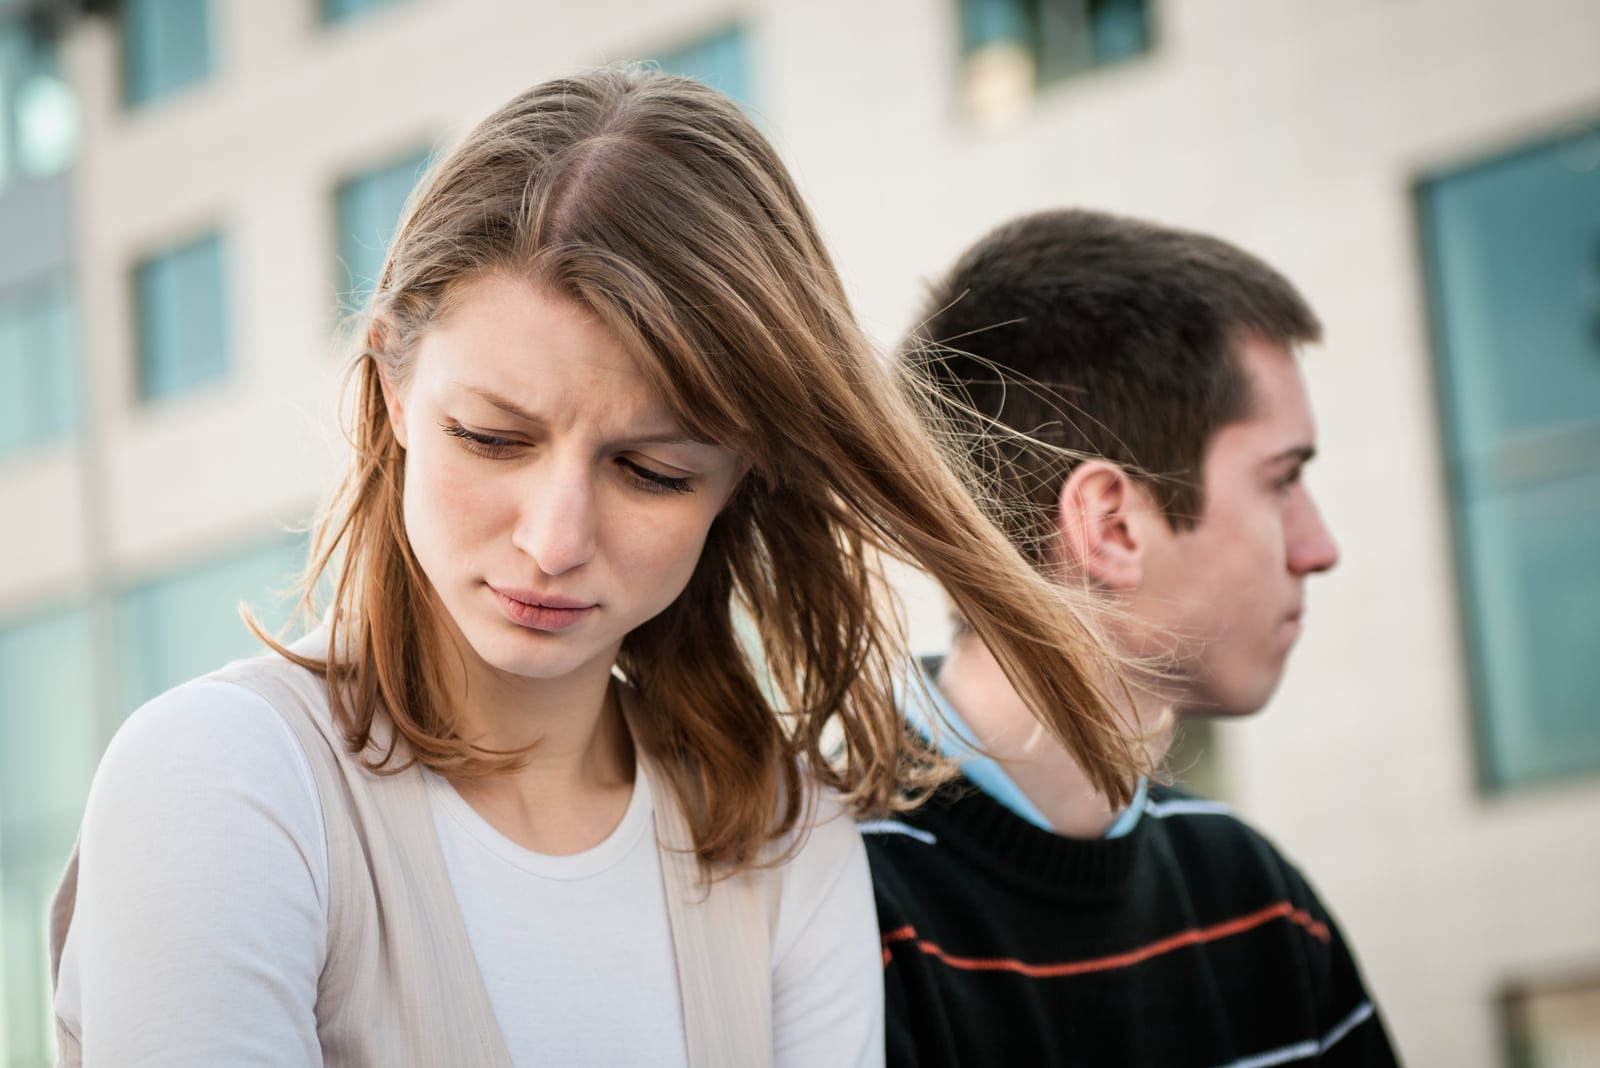 young woman and man outdoor on street having relationship problems